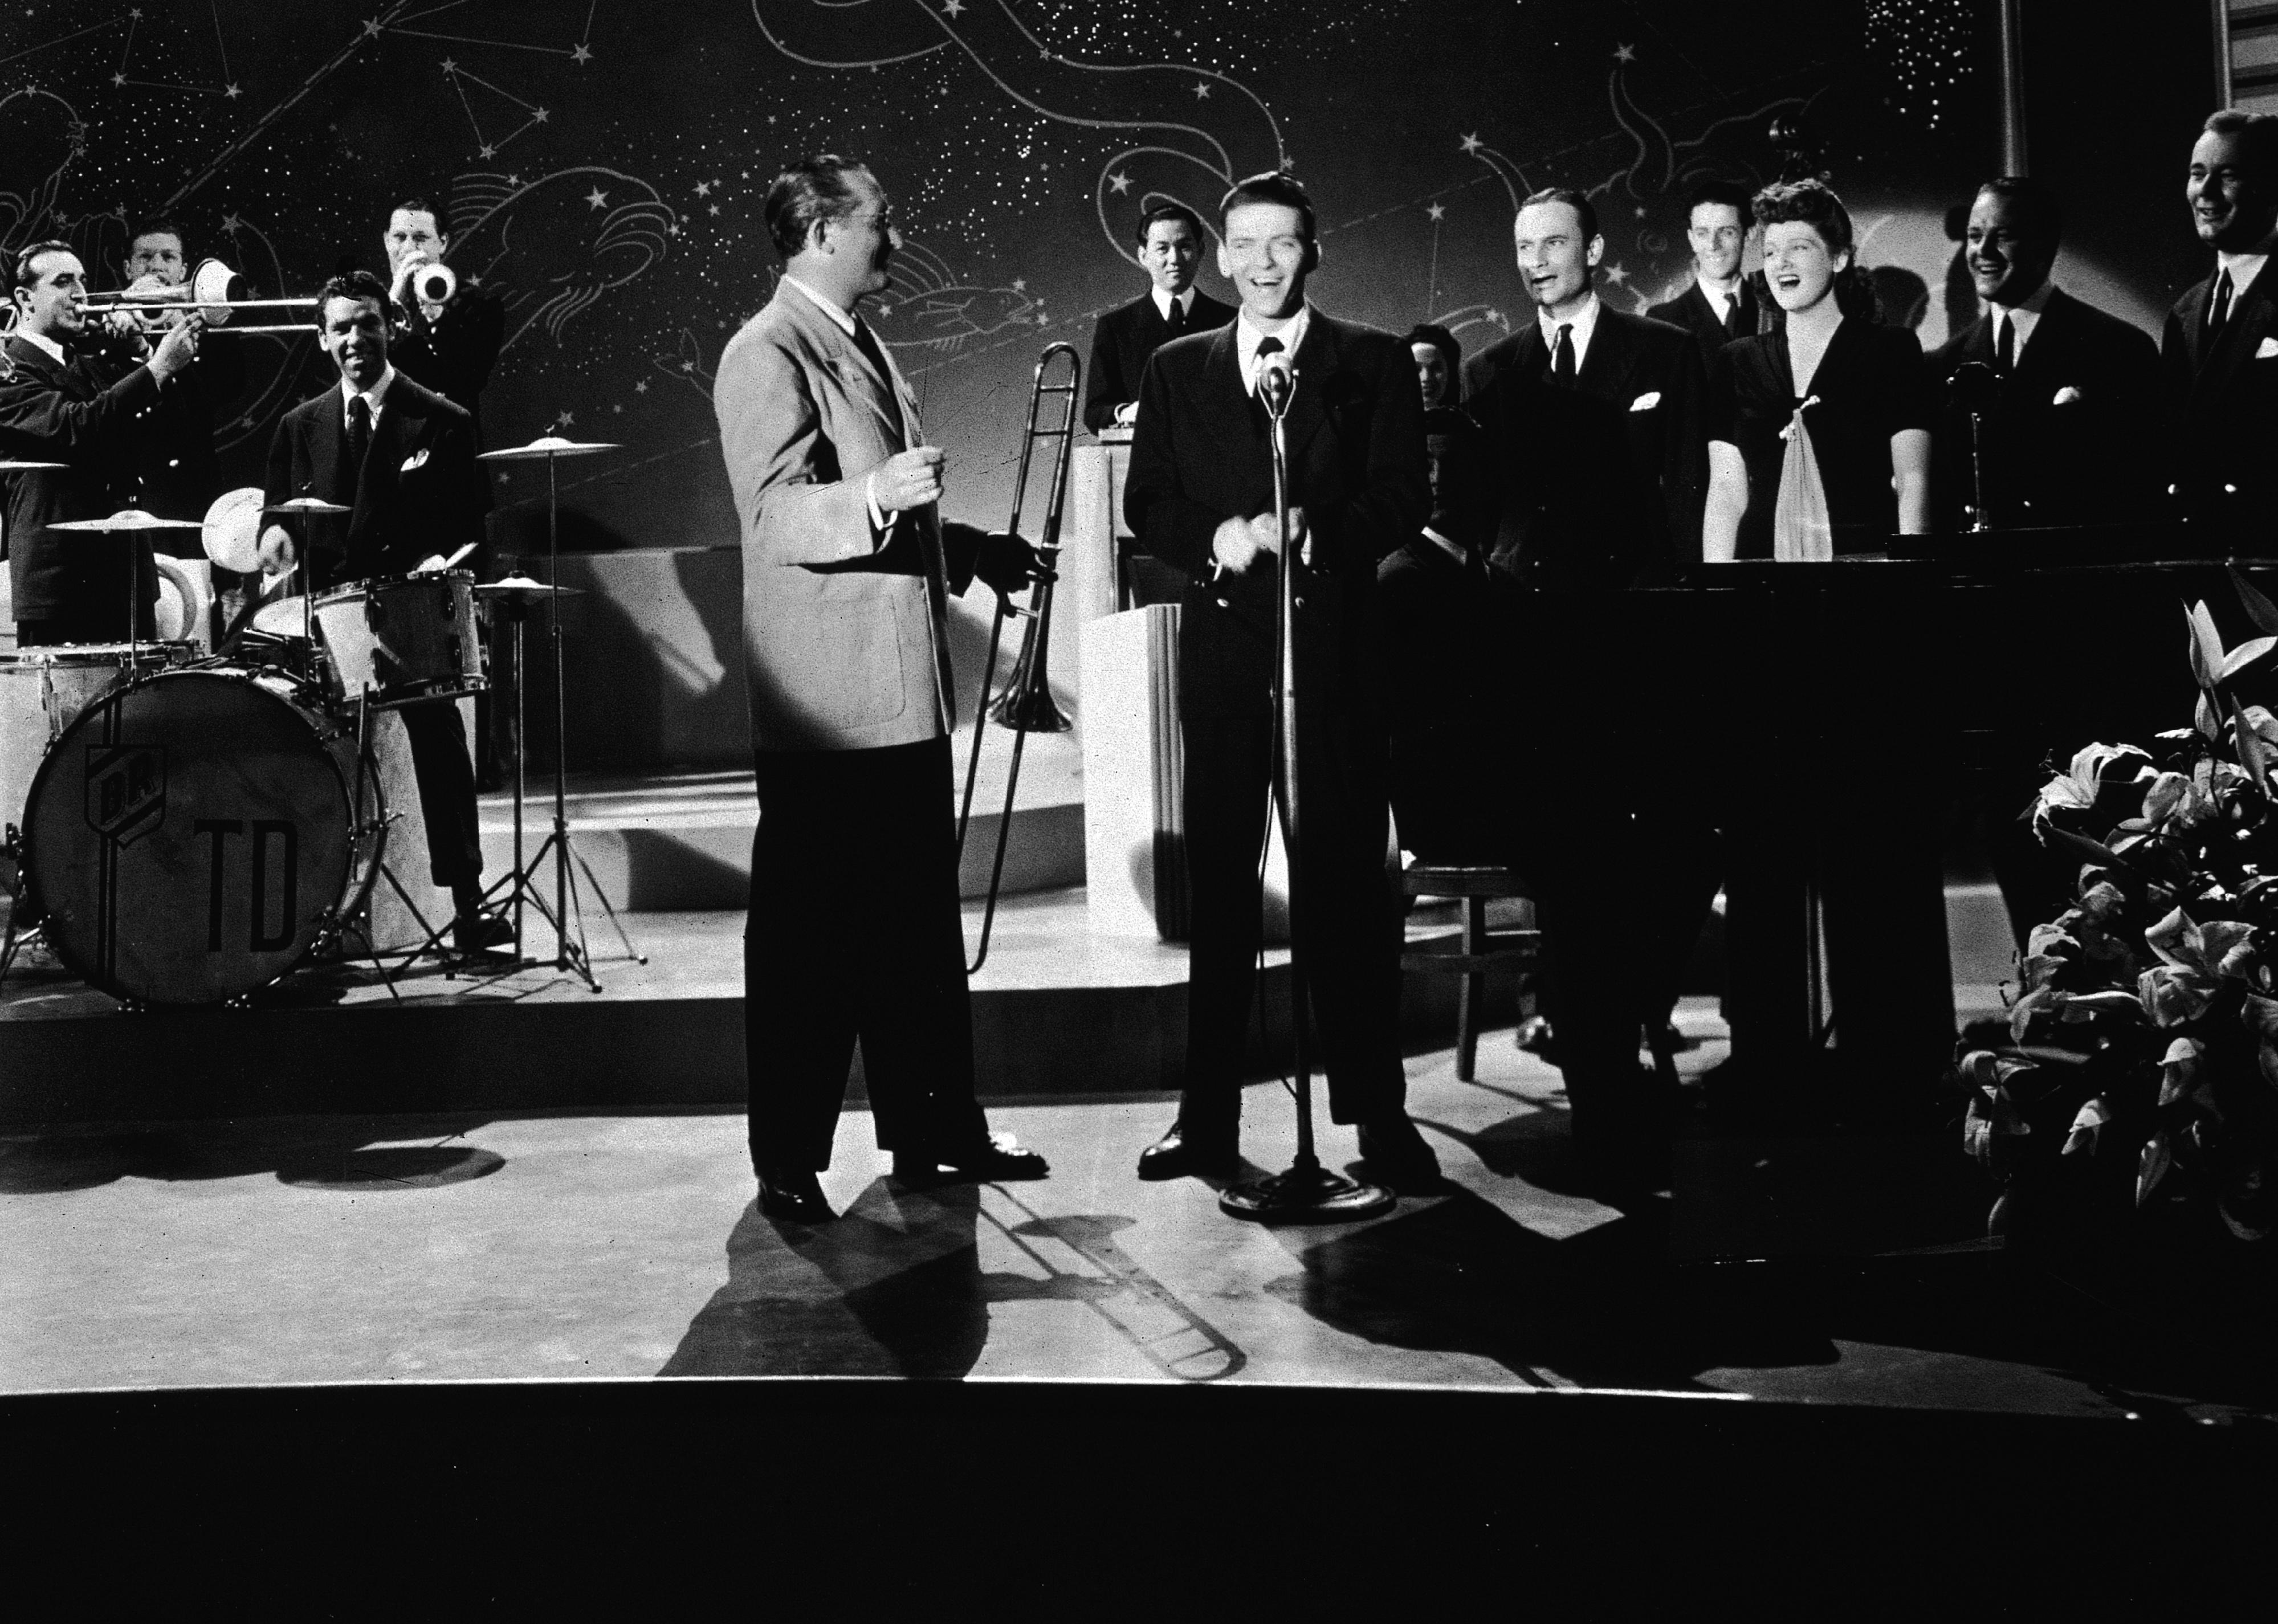 Frank Sinatra performs with the Tommy Dorsey Orchestra in a still from the film, 'Ship Ahoy'.